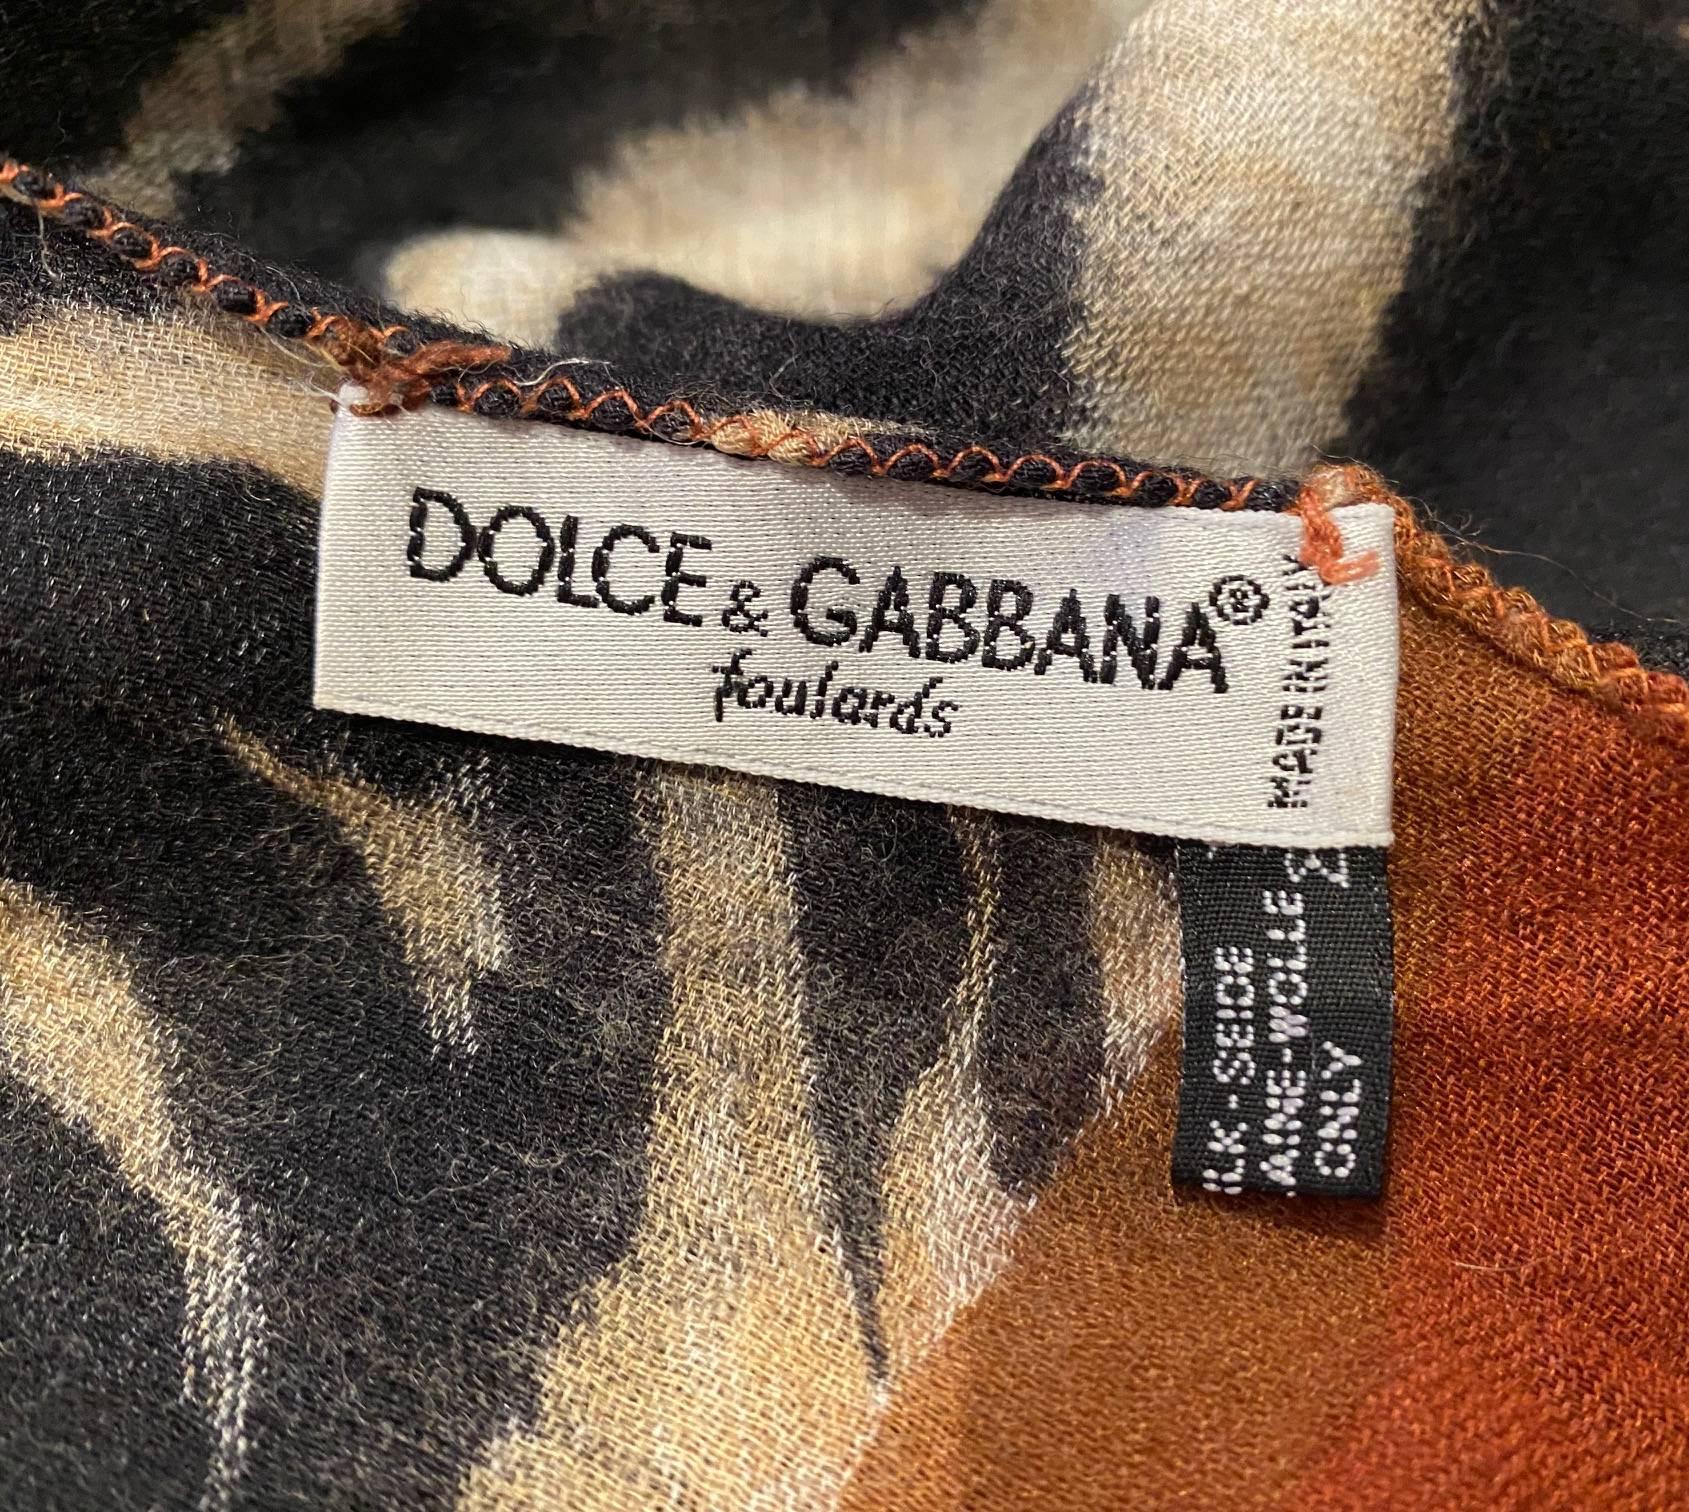 1990's Dolce Gabbana vintage zebra skin print shawl scarf pareo, 50% silk, 50% wool, Made in Italy  This luxurious blend of silk and wool is sure to keep you comfortable and warm, with the iconic zebra print adding the perfect touch of